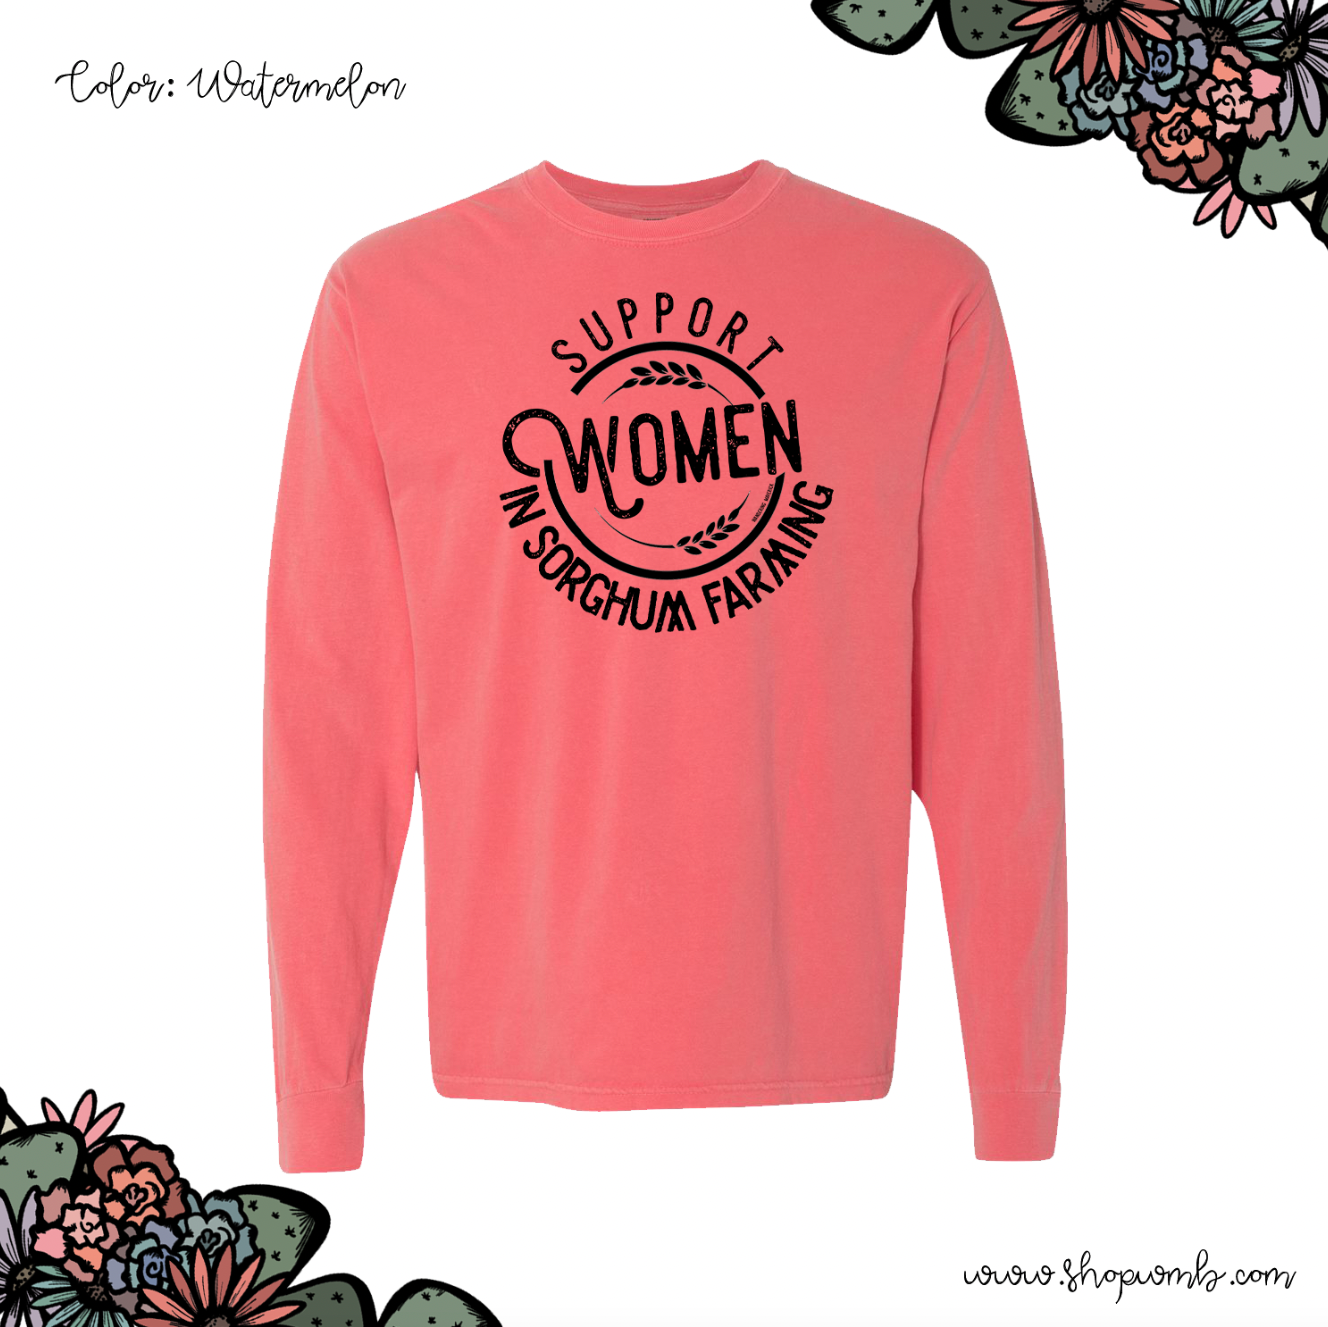 Support Women In Sorghum Farming LONG SLEEVE T-Shirt (S-3XL) - Multiple Colors!